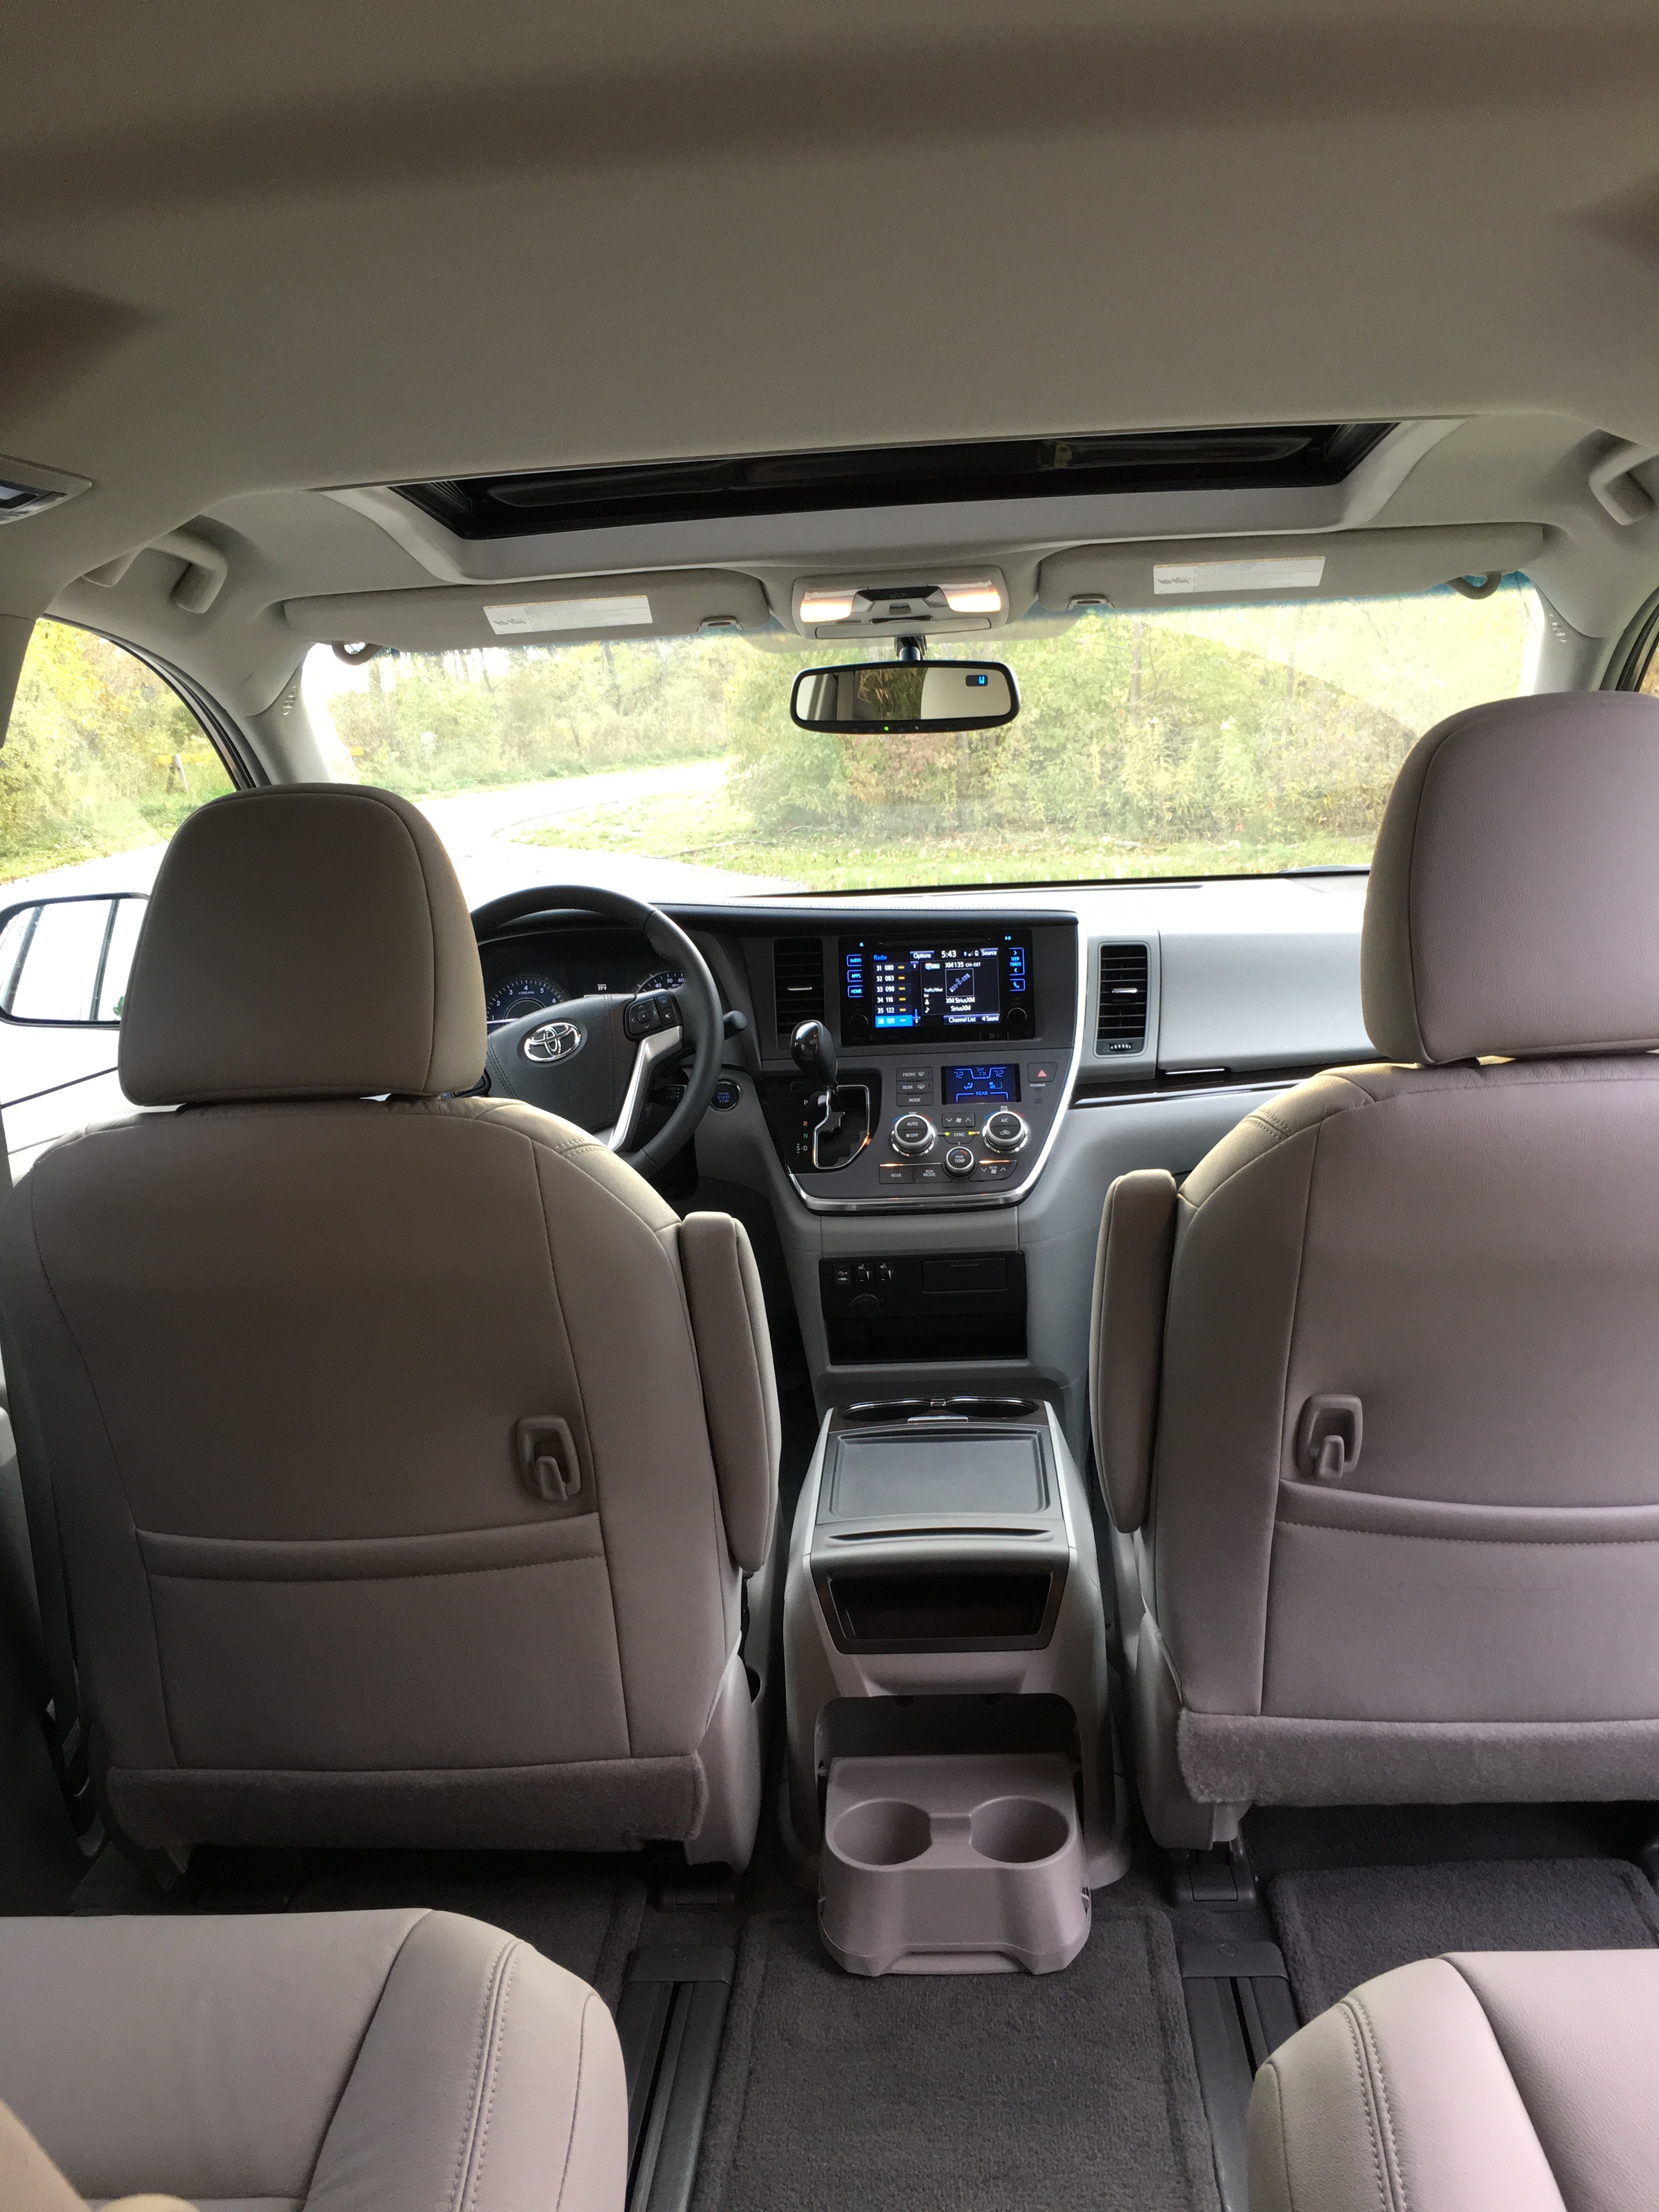 2017 Toyota Sienna Review